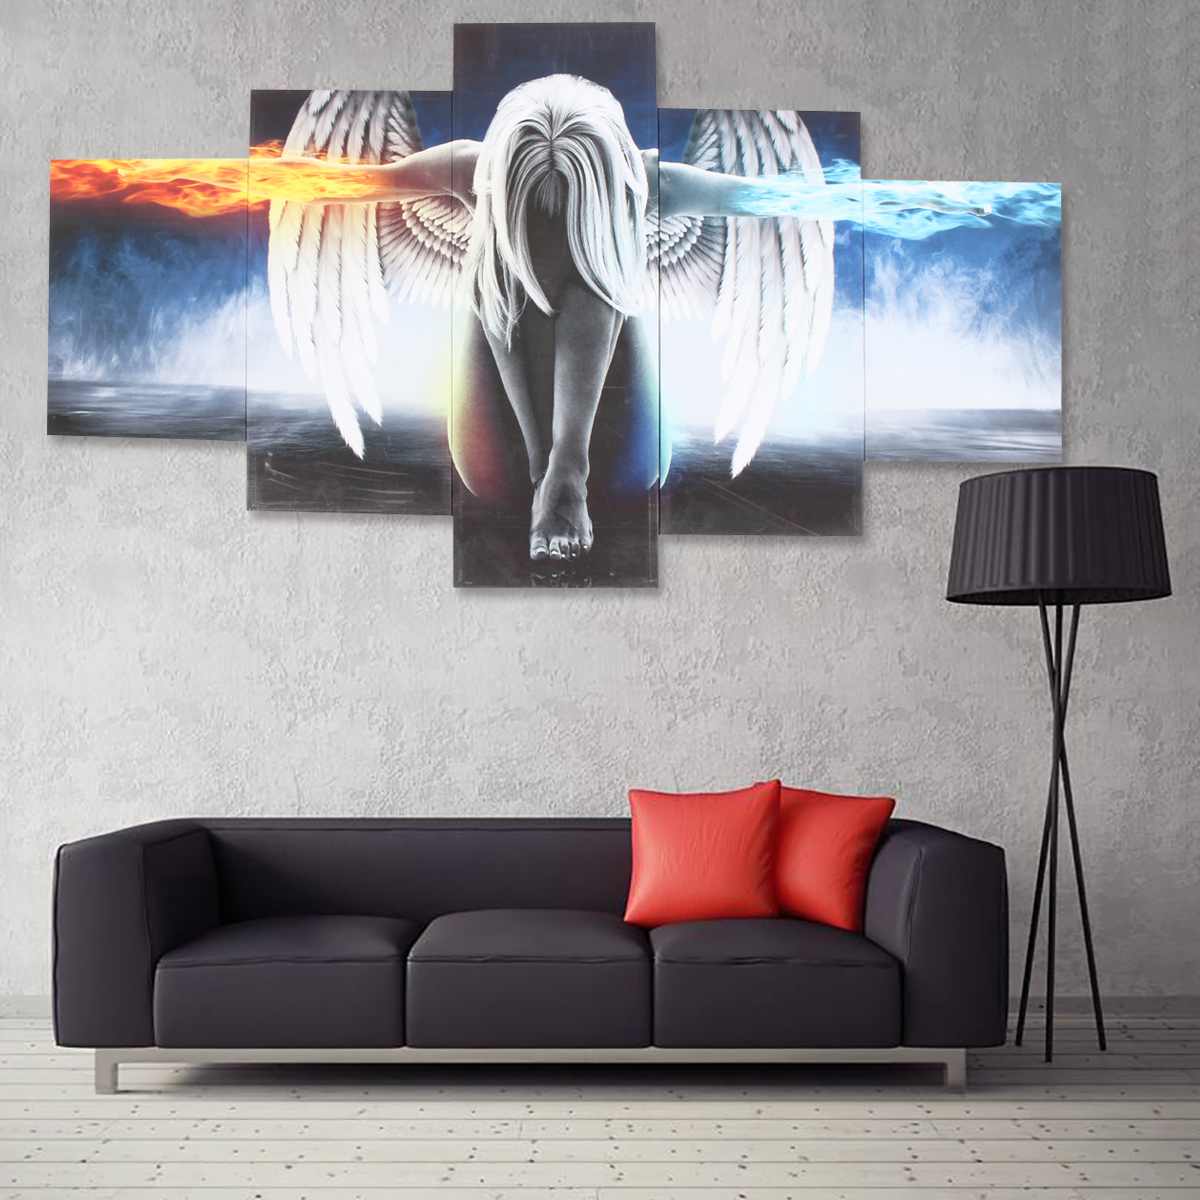 5PCS-Angel-Canvas-Print-Painting-Modern-Art-Wall-Picture-Home-Decor-Decoration-with-Framed-for-Home--1219145-6